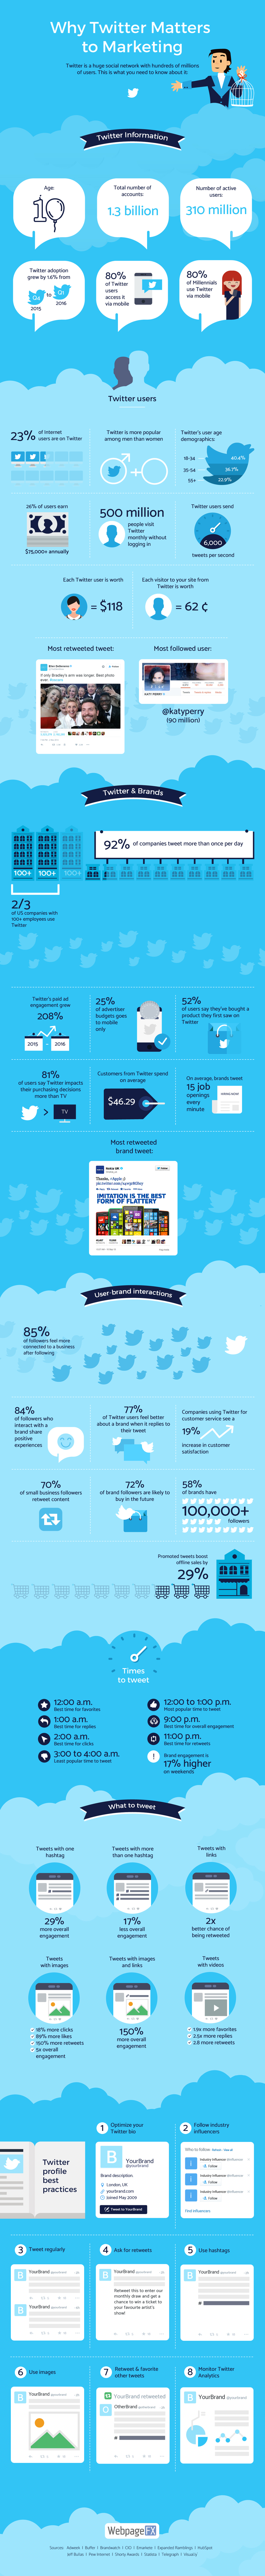 twitter-stats-infographic